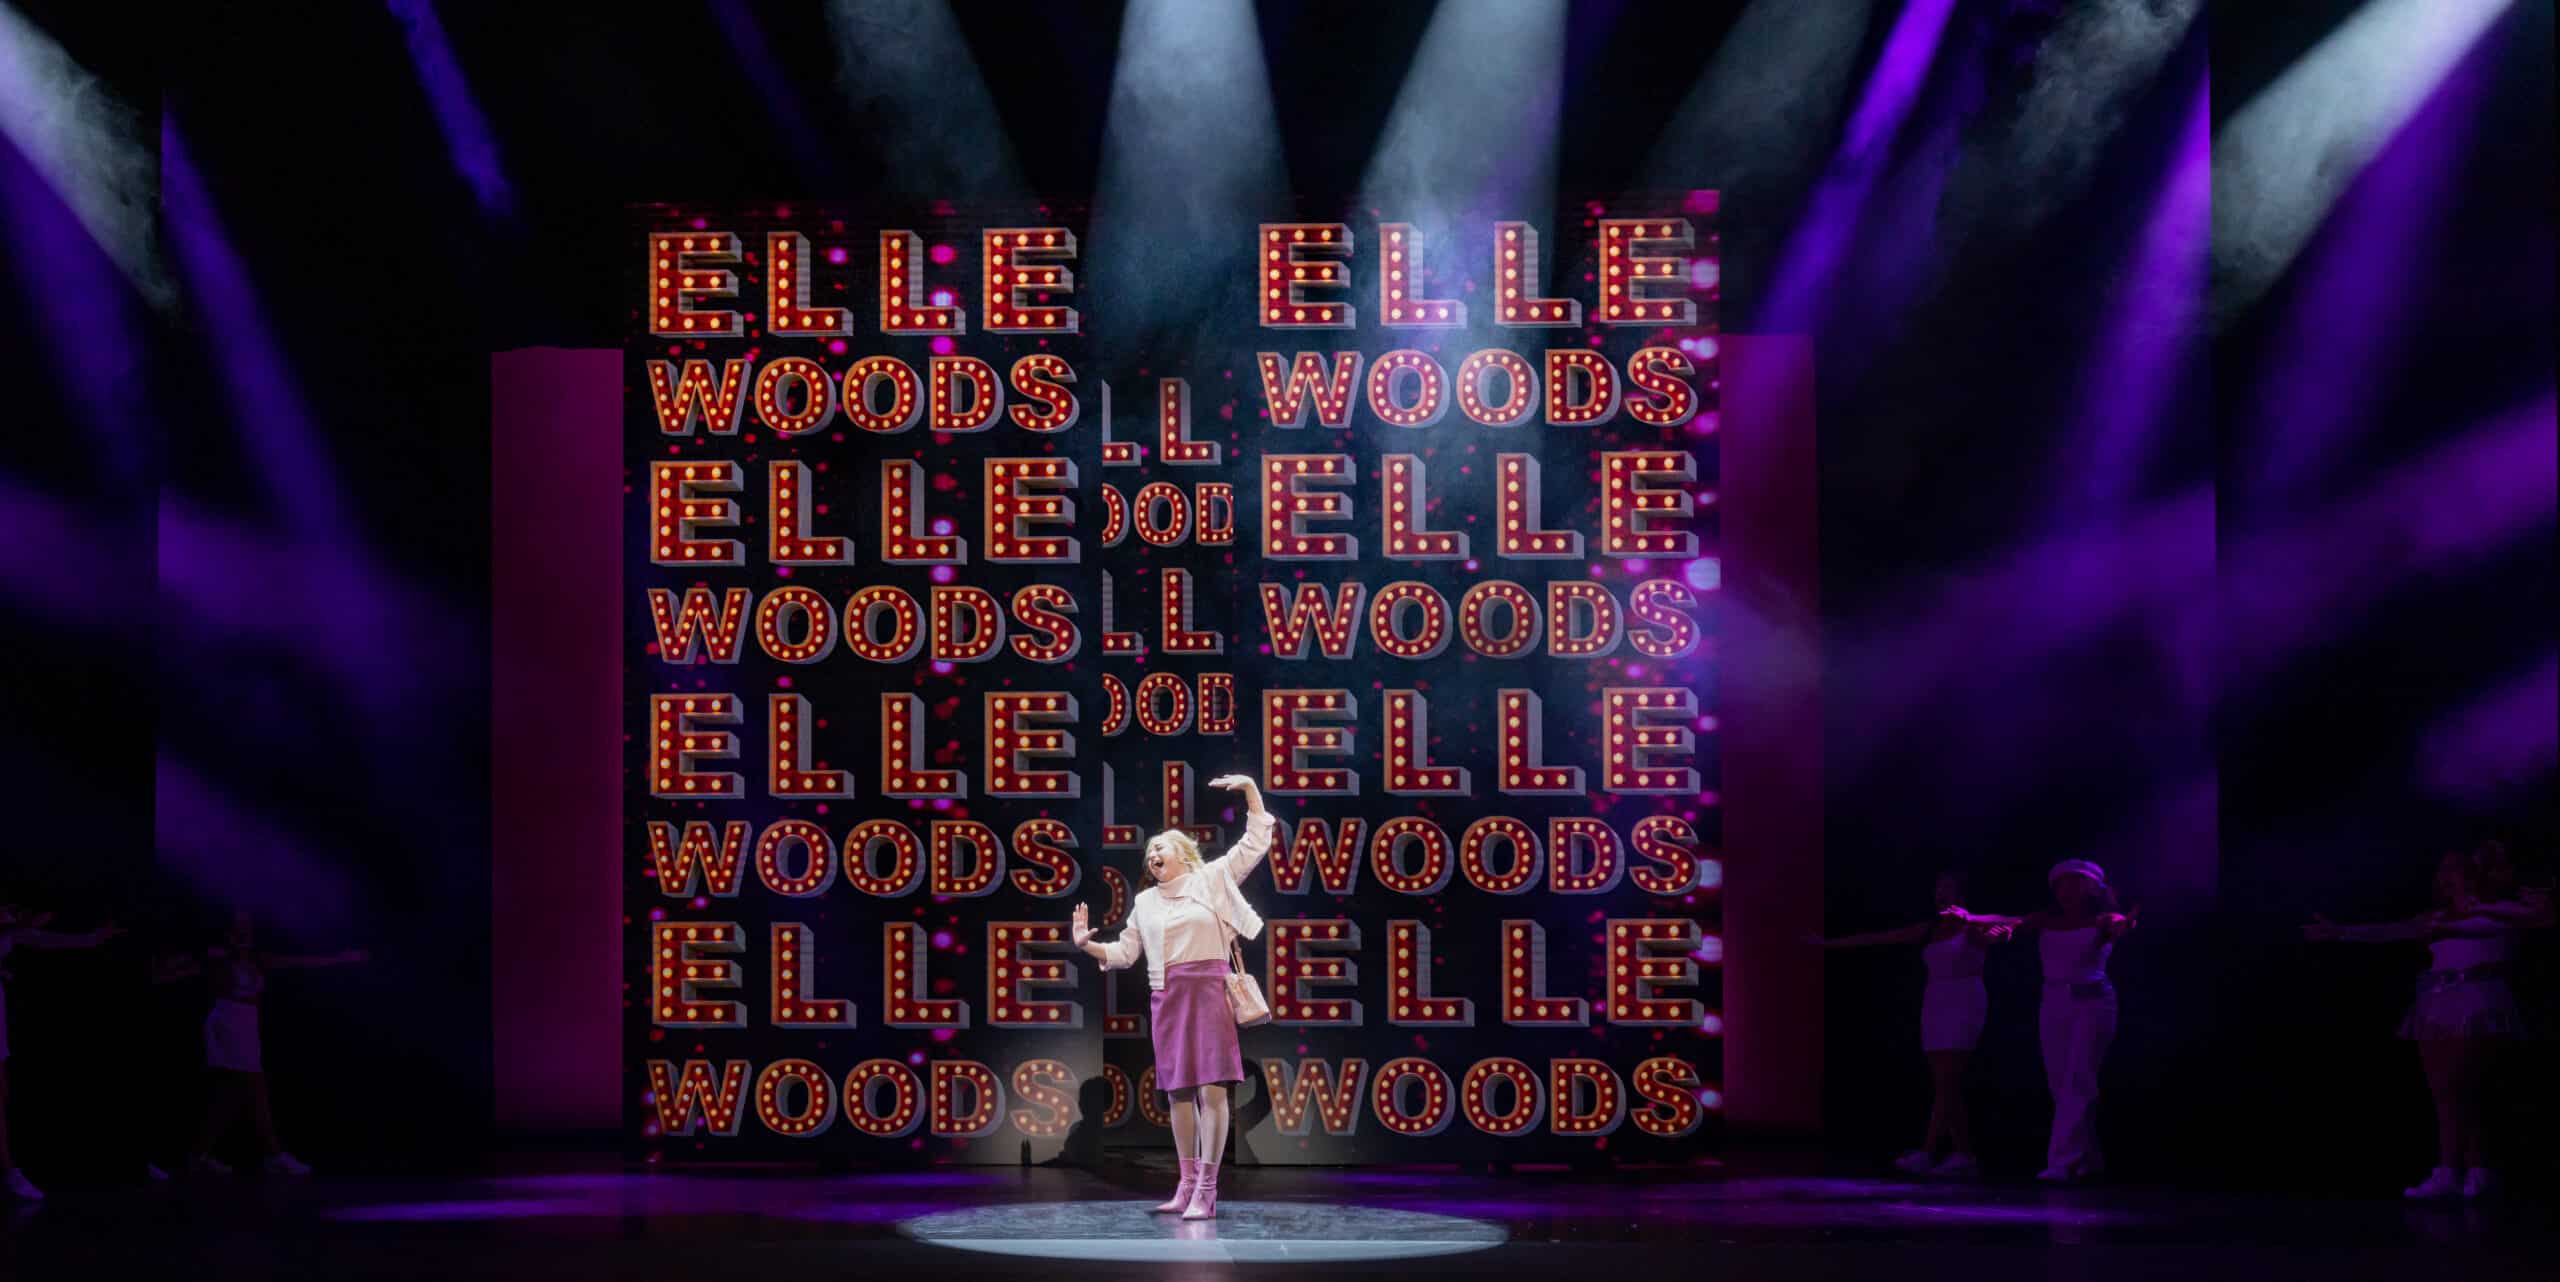 Elle Woods standing center stage with her name in lights behind her.